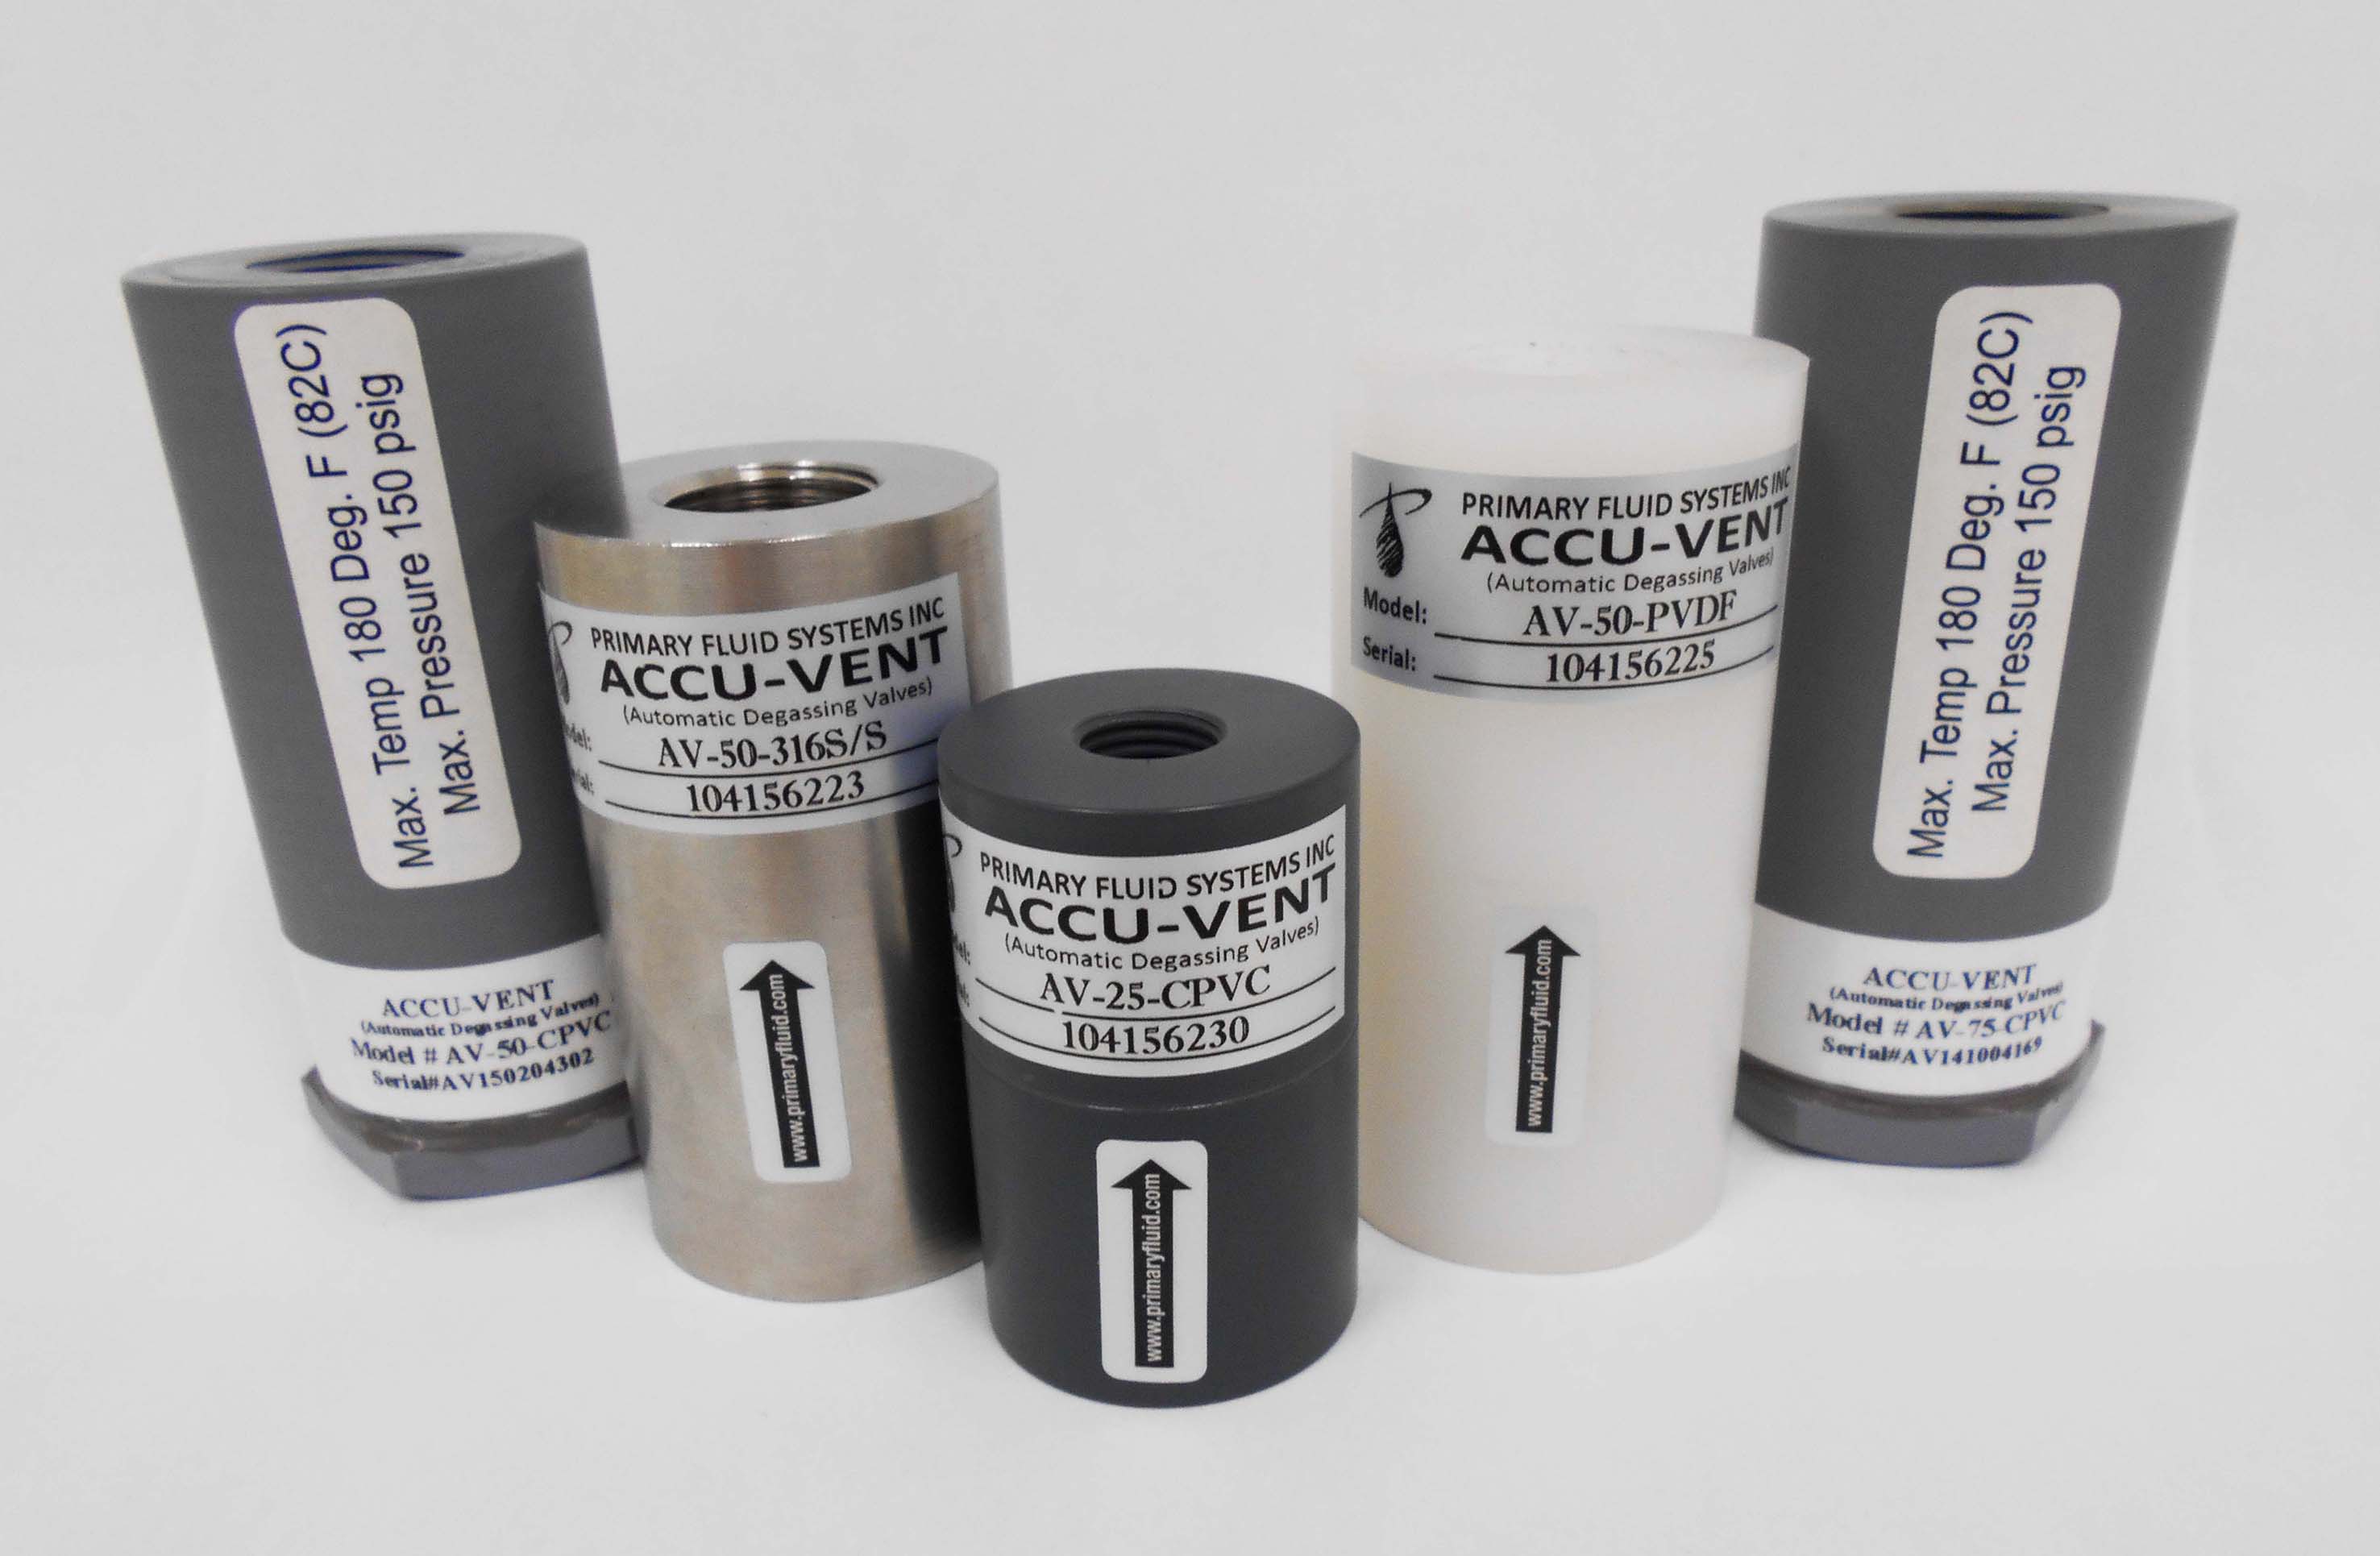 Accu-Vent Automatic Degassing Valve in Metal and Plastic